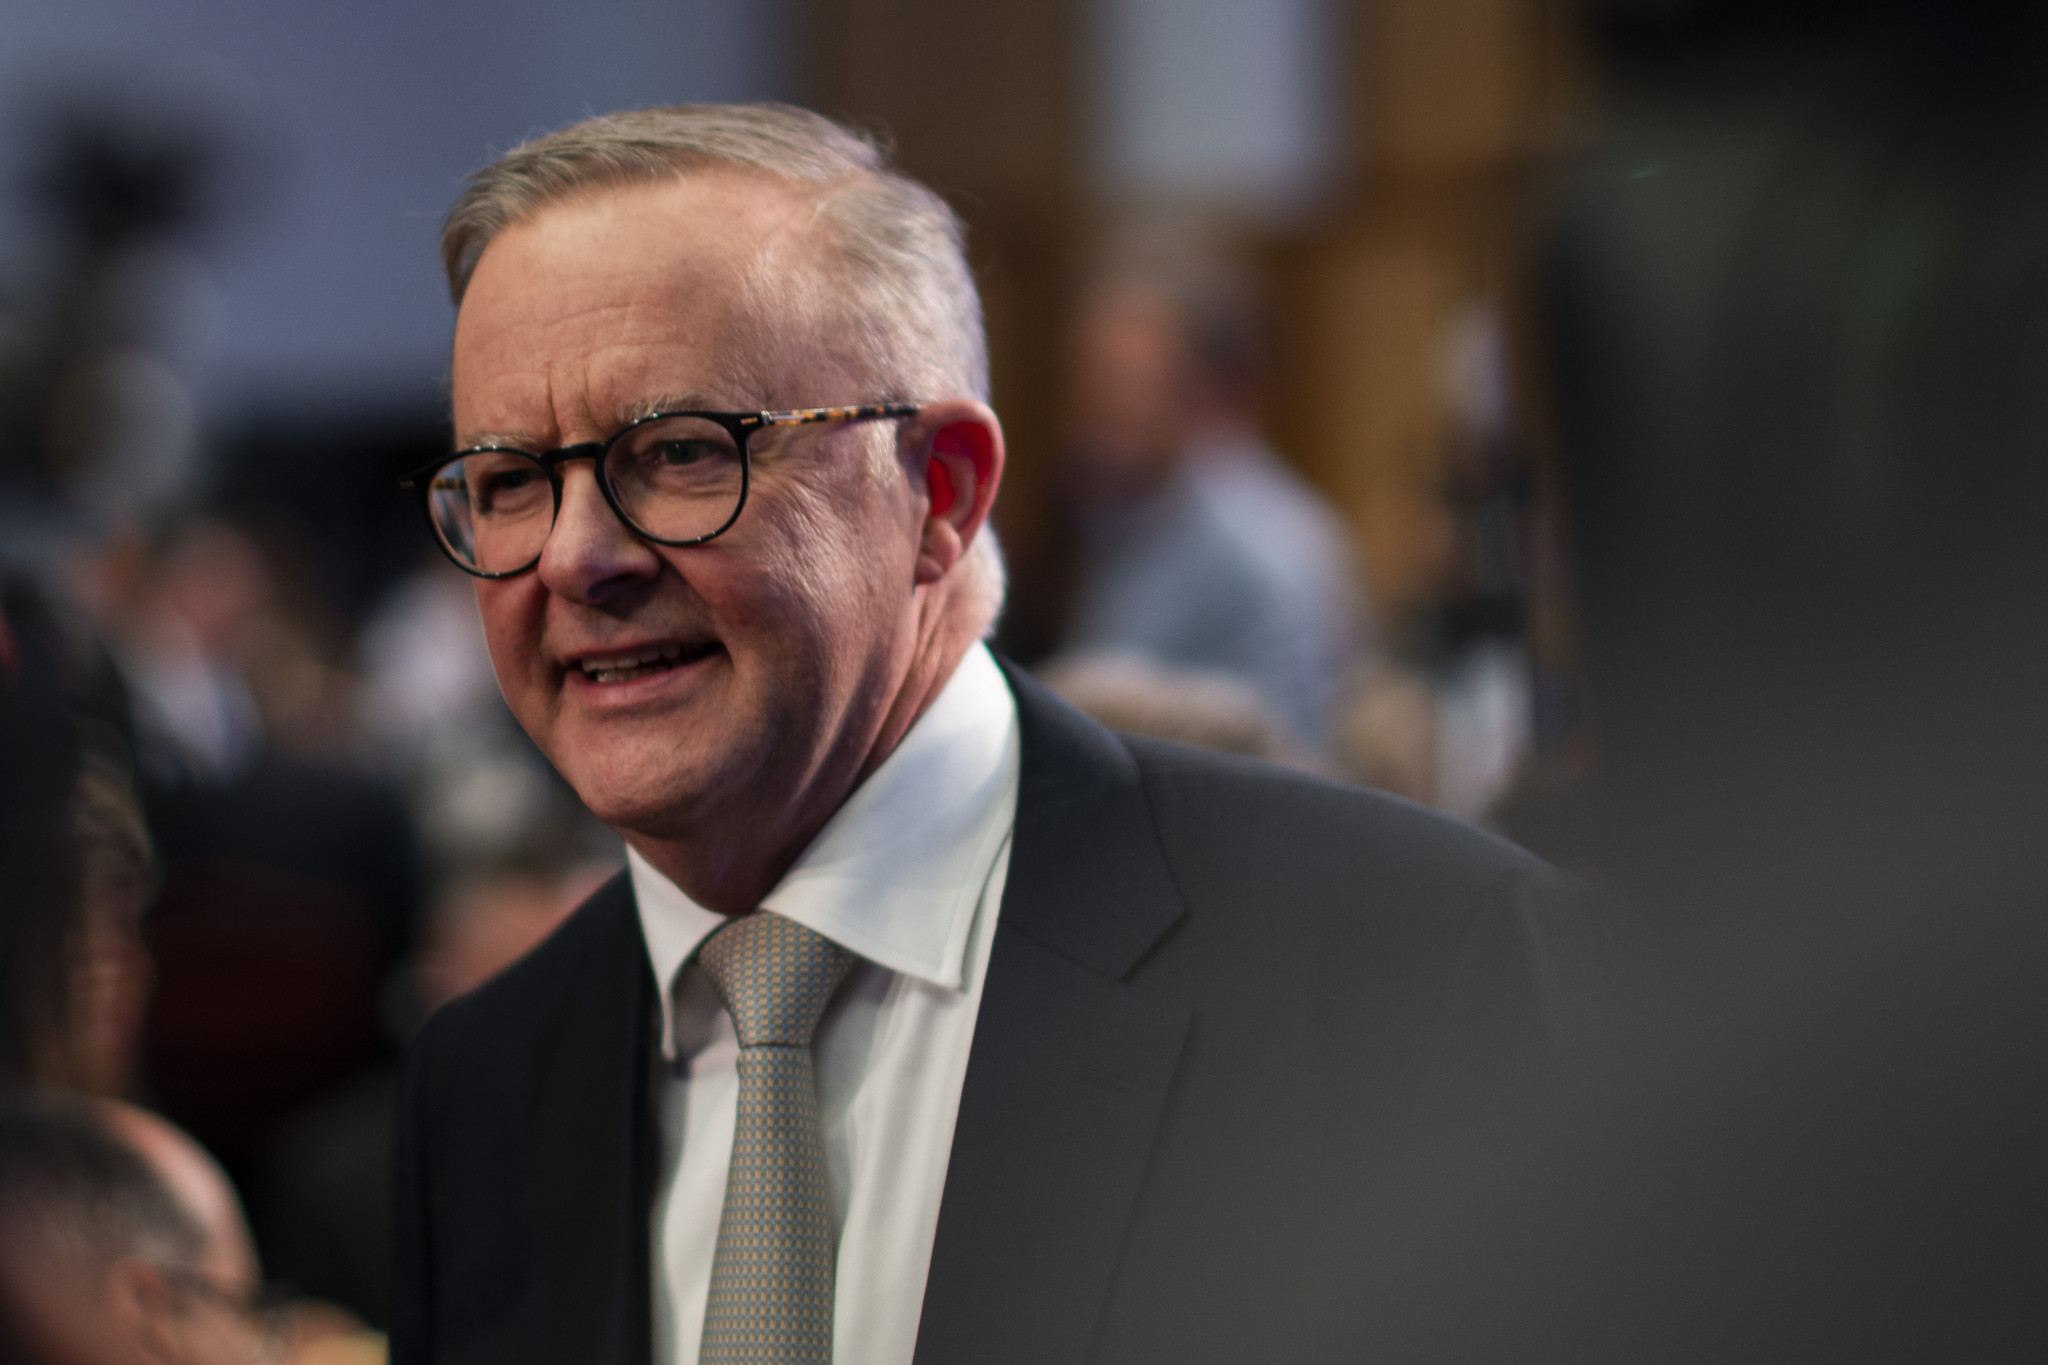 Anthony Albanese succeeded Scott Morrison as Australian Prime Minister last year ©Getty Images